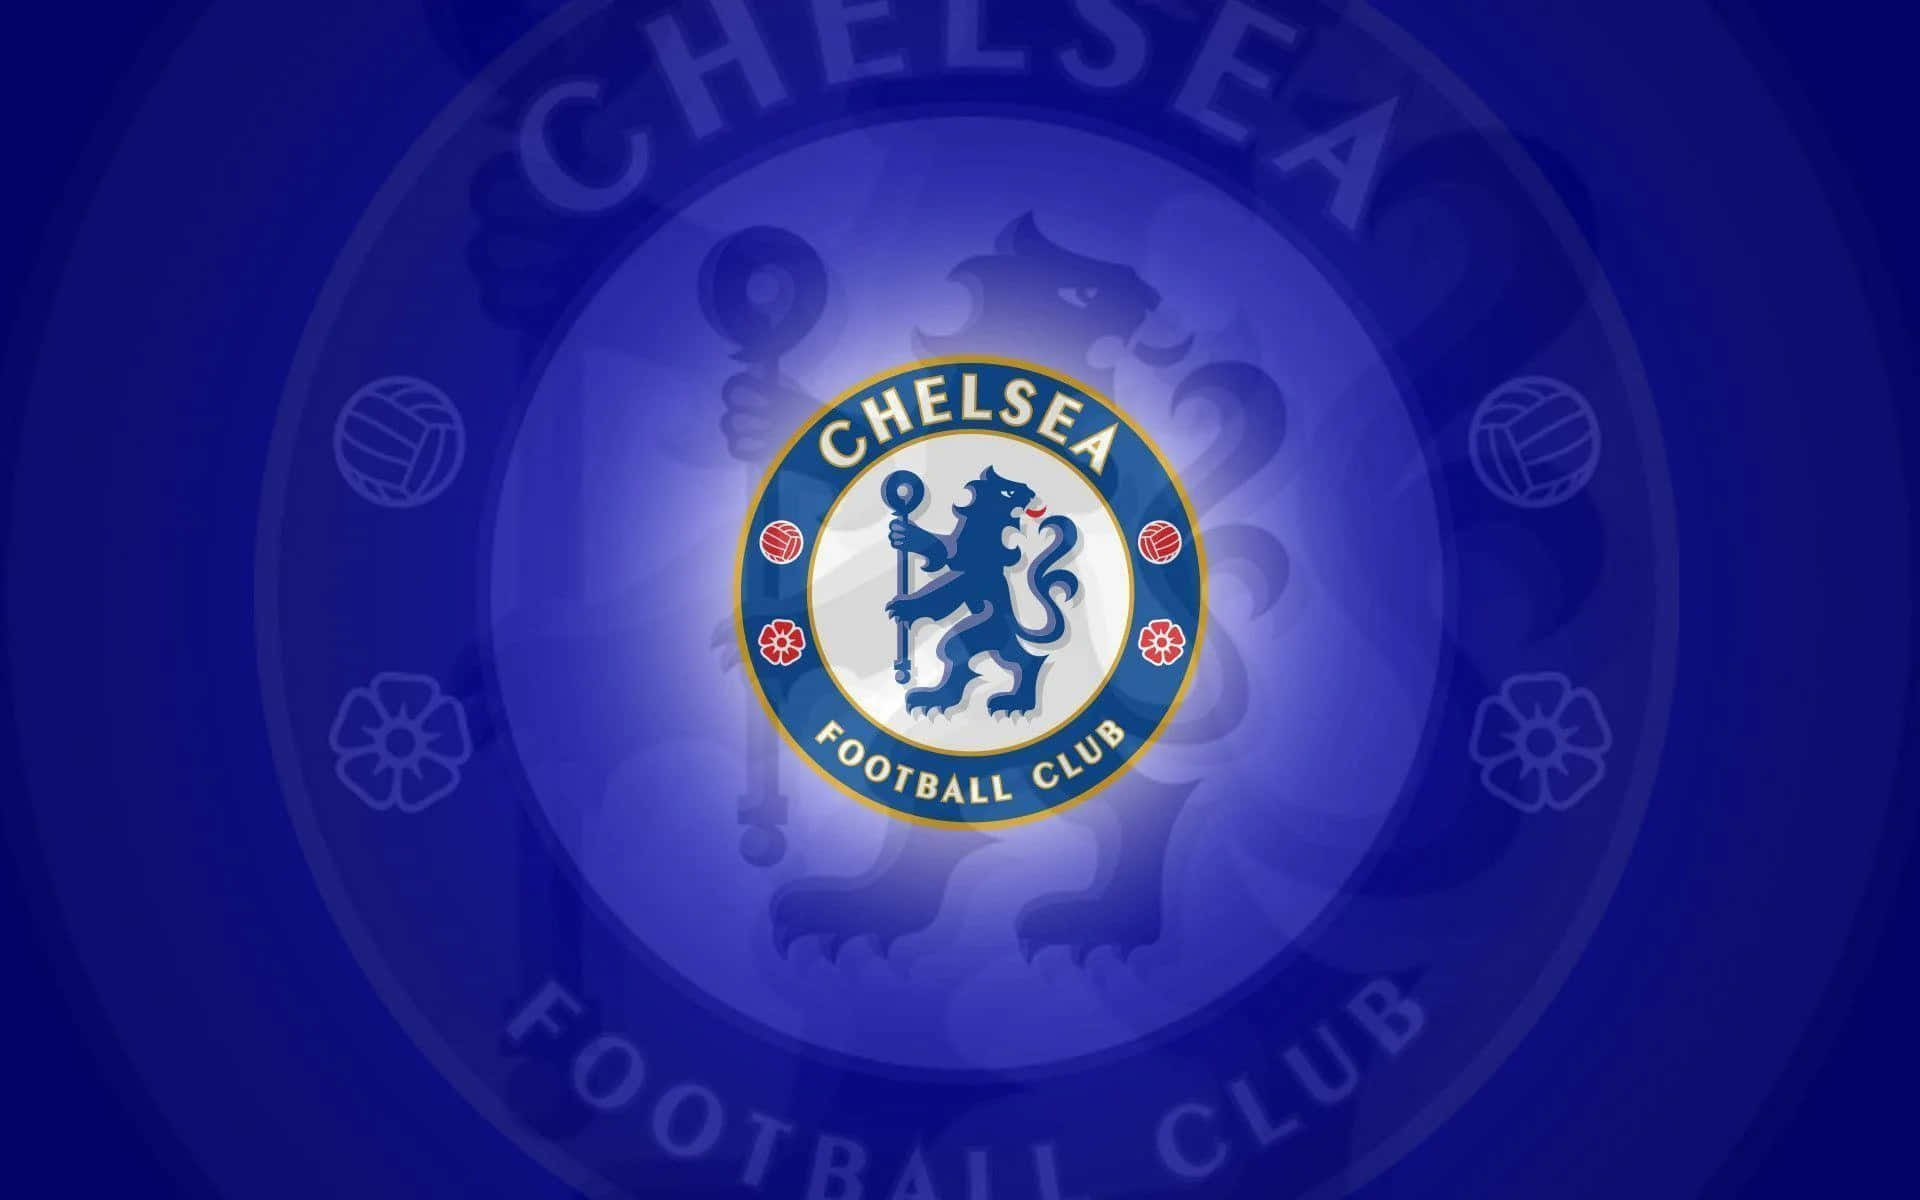 Show Your Support for The Chelsea Football Club